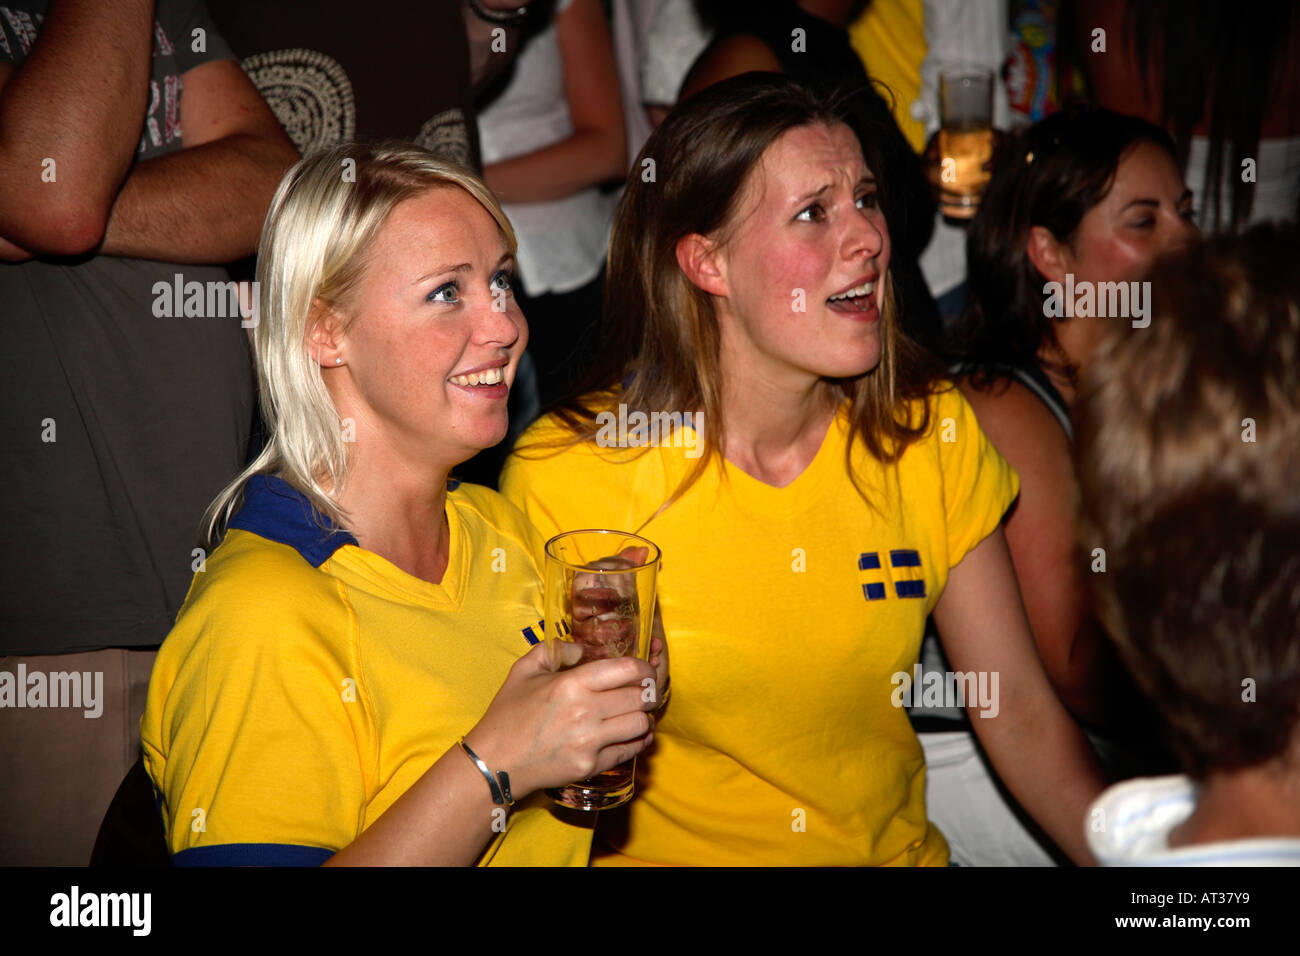 Female Swedish fans watching Sweden's opening game vs Trinidad & Tobago, World Cup 2006, Nordic Bar, London Stock Photo